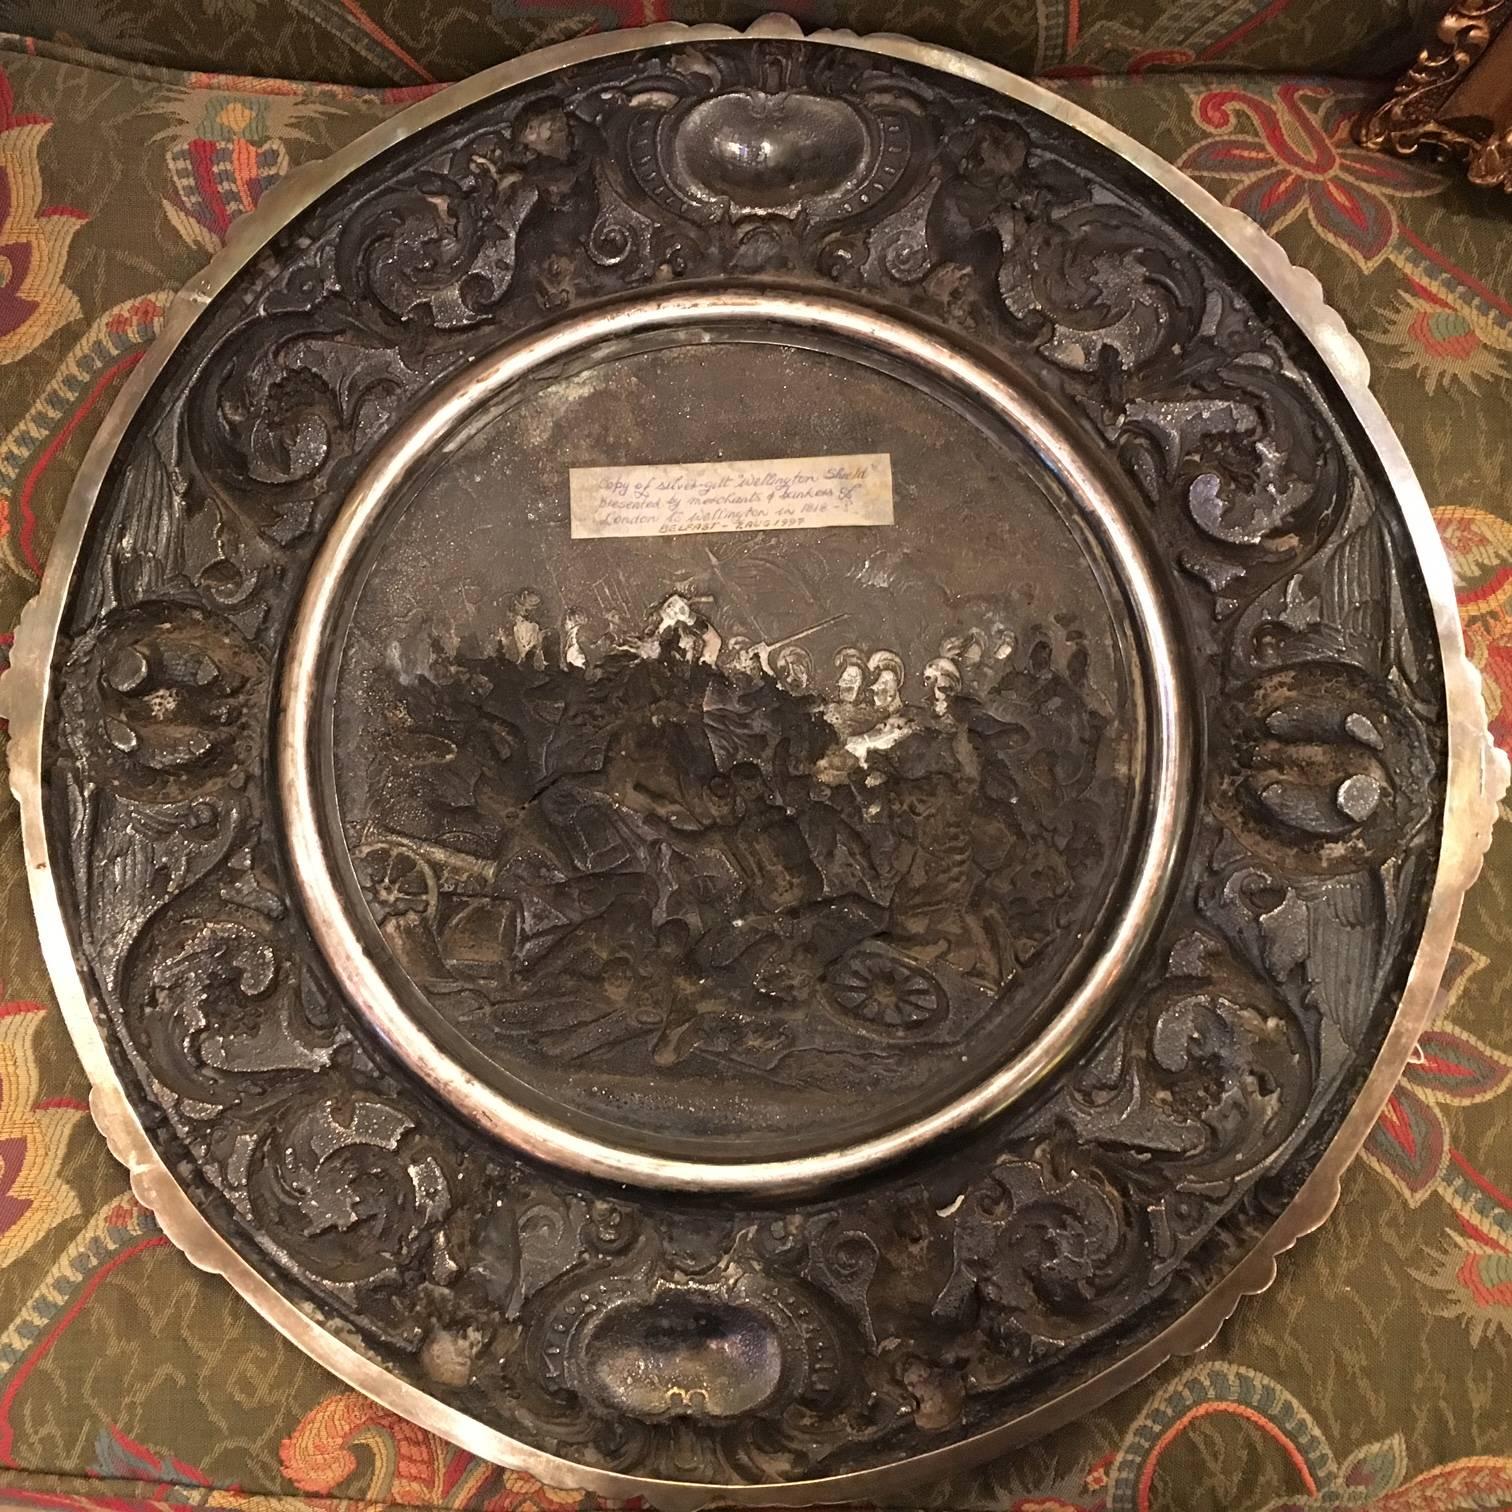 Victorian Sumptuous Sideboard Dish, Cast with a Cavalry Charge at Waterloo